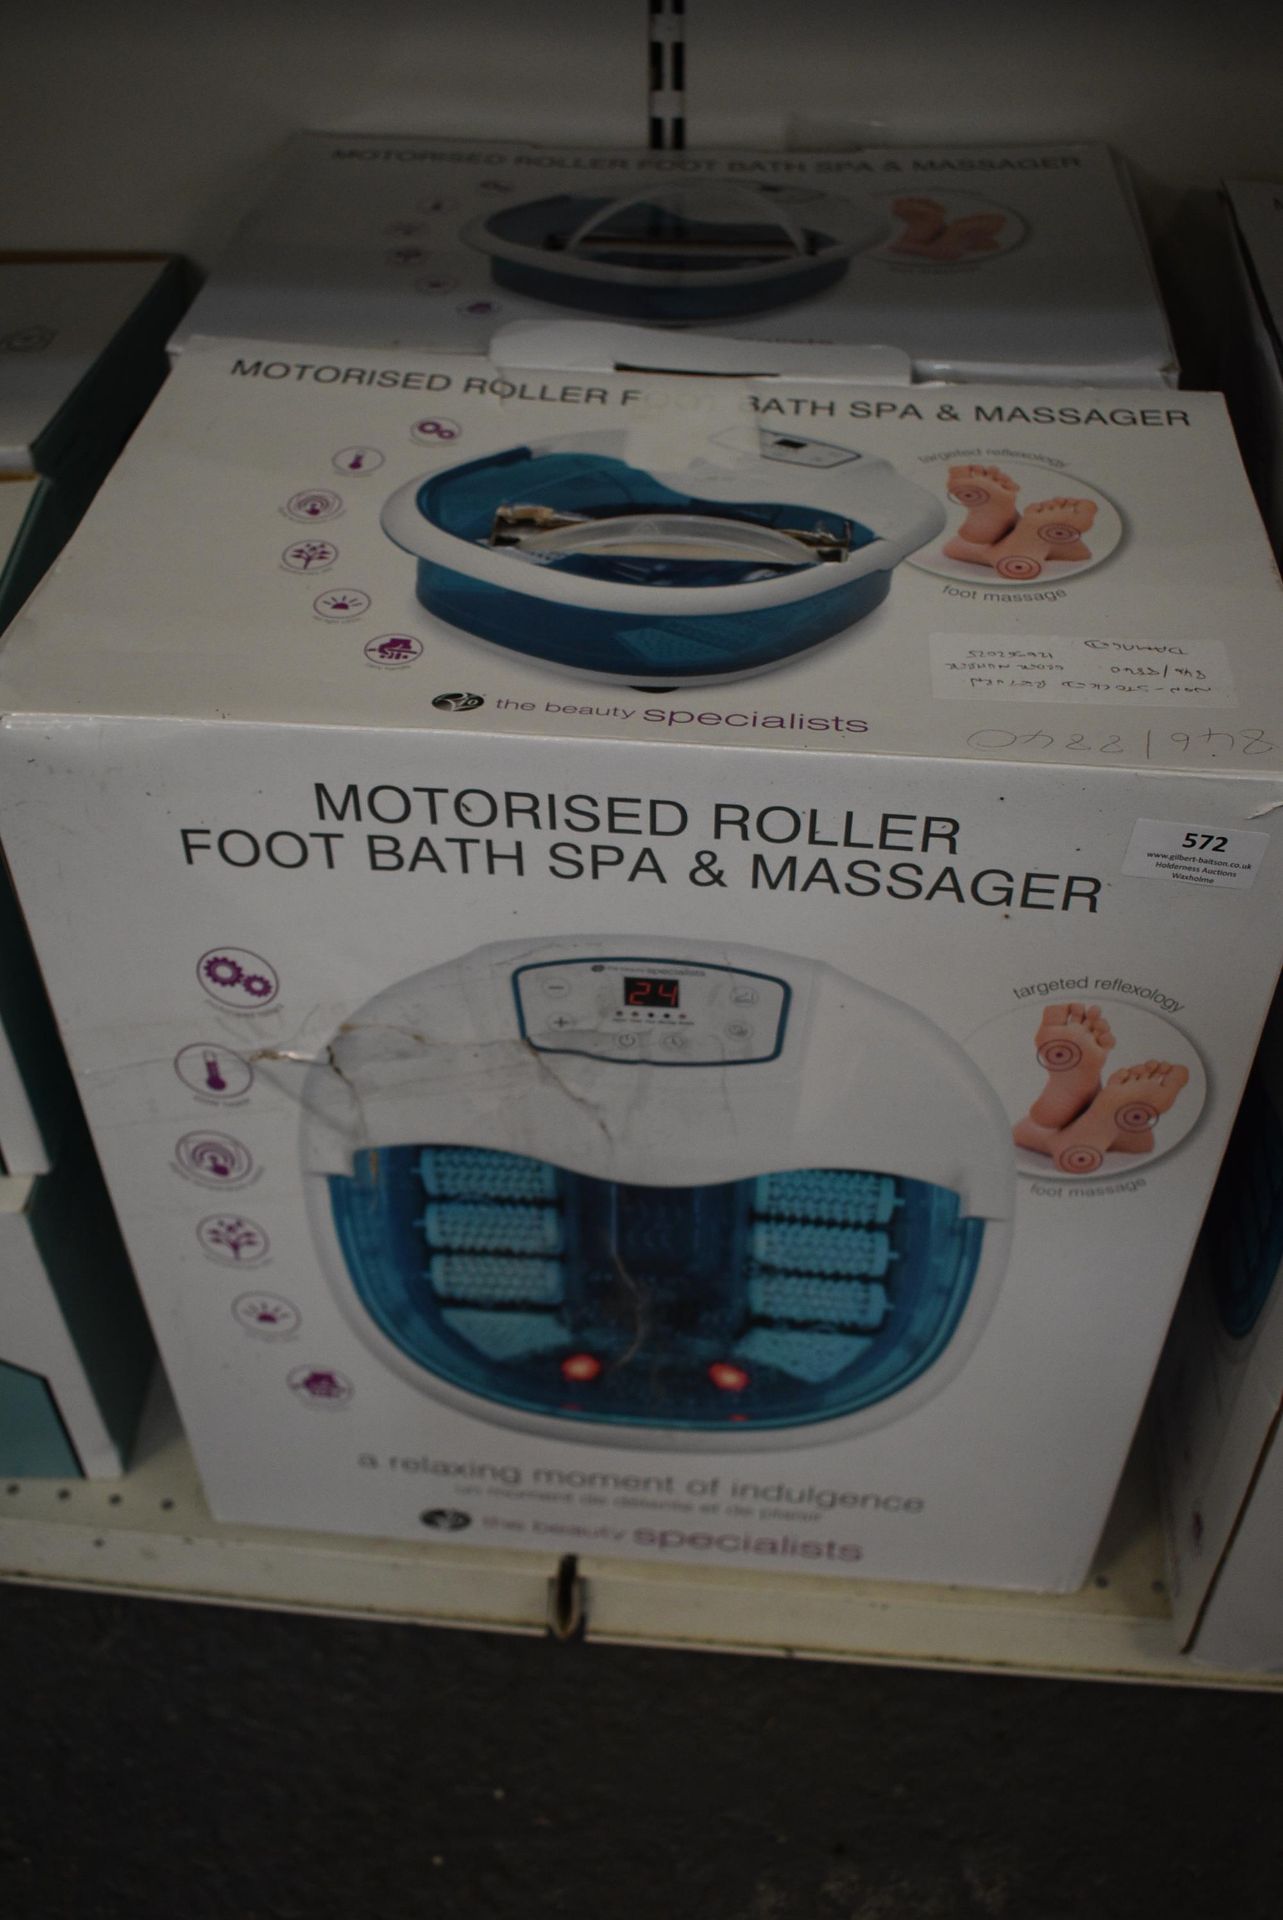 Two Motorised Roller Foot Bath Spa & Massagers - Image 2 of 2